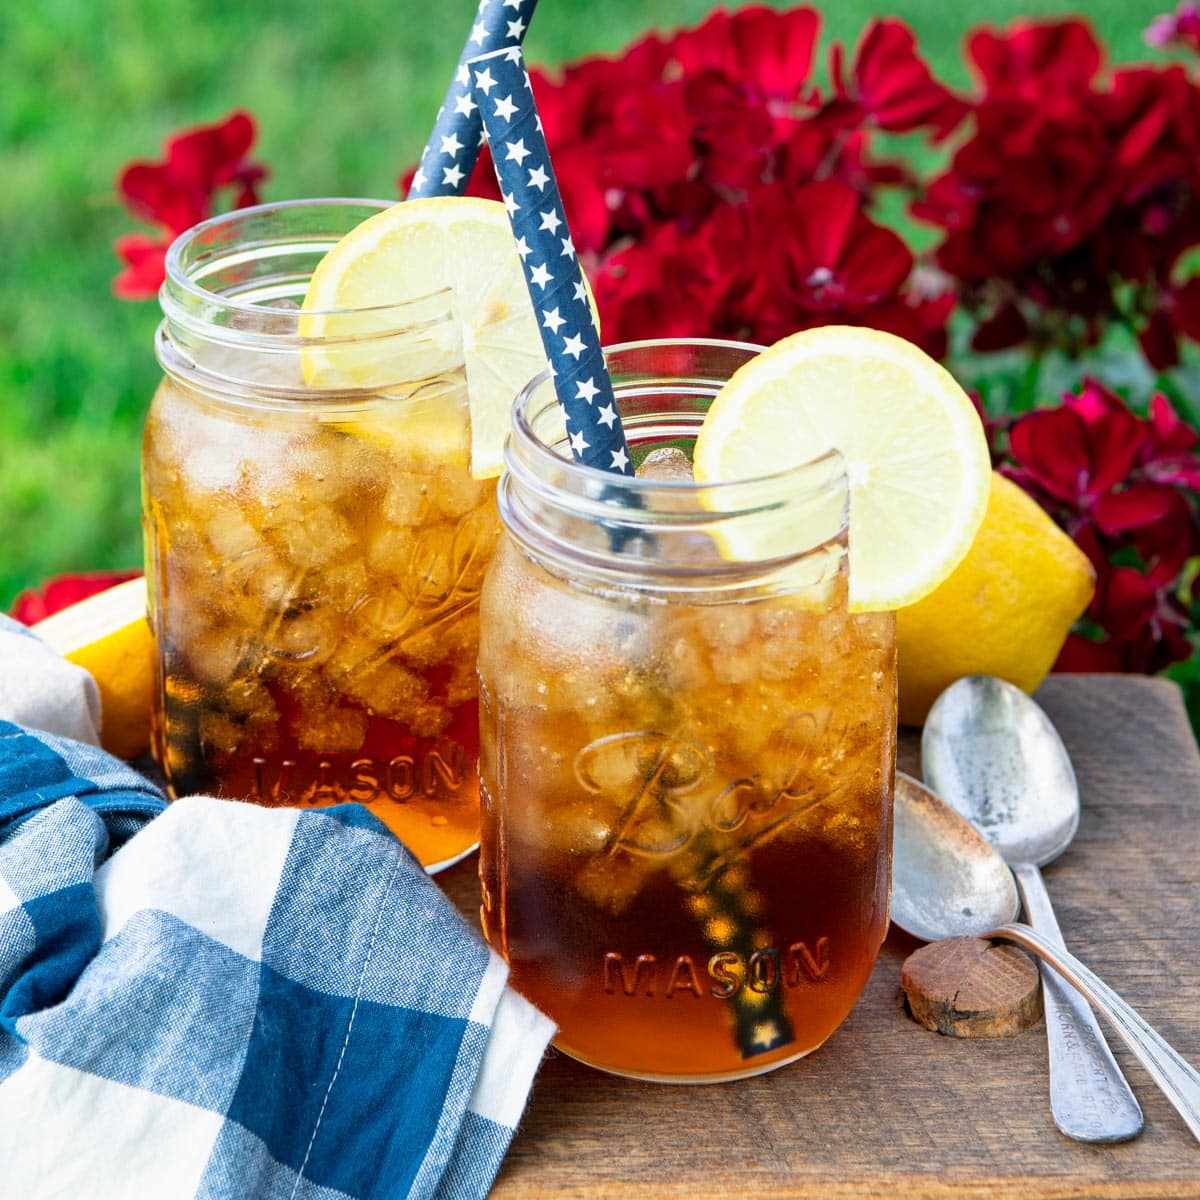 How to Make Iced Tea: Cold Brew, Sun Tea and Hot Brew and Chill